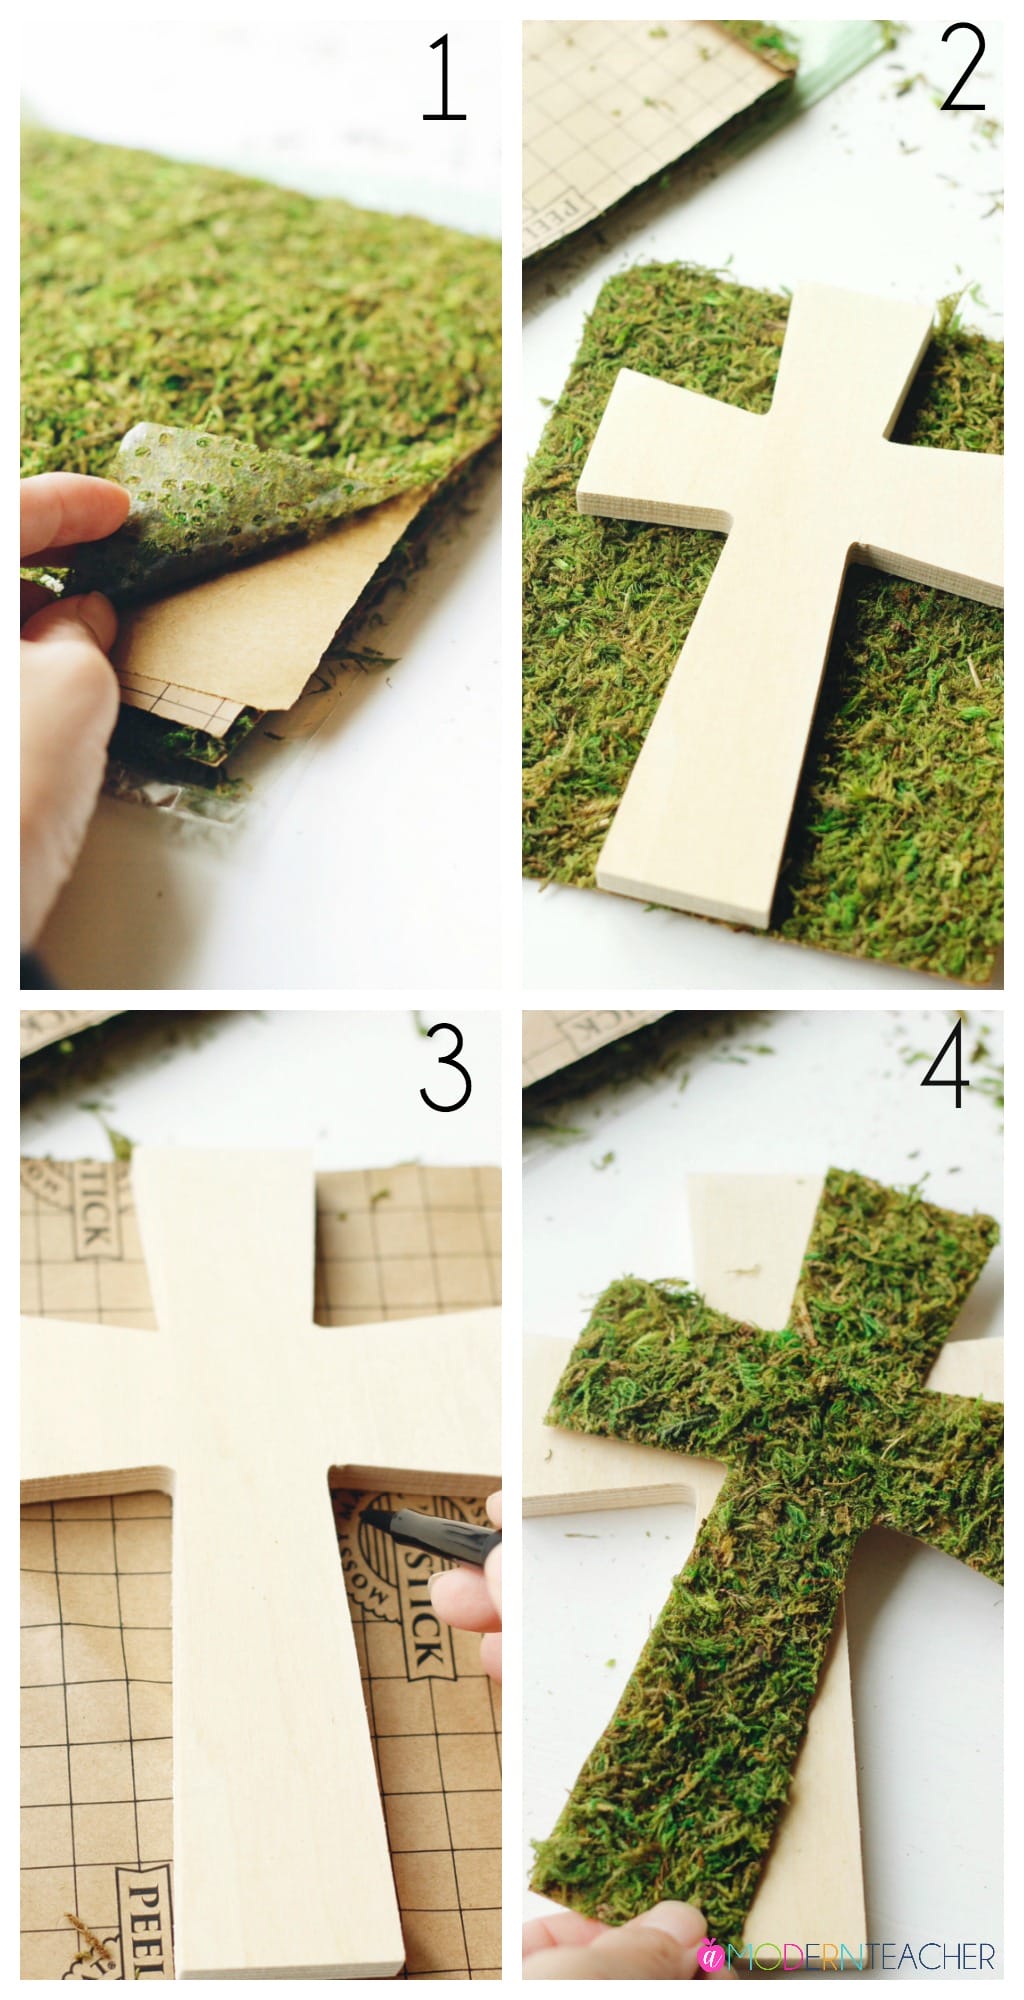 DIY Easter Cross is the perfect addition to your spring home decor and Easter Brunch. A simple spring project you can complete in no time.